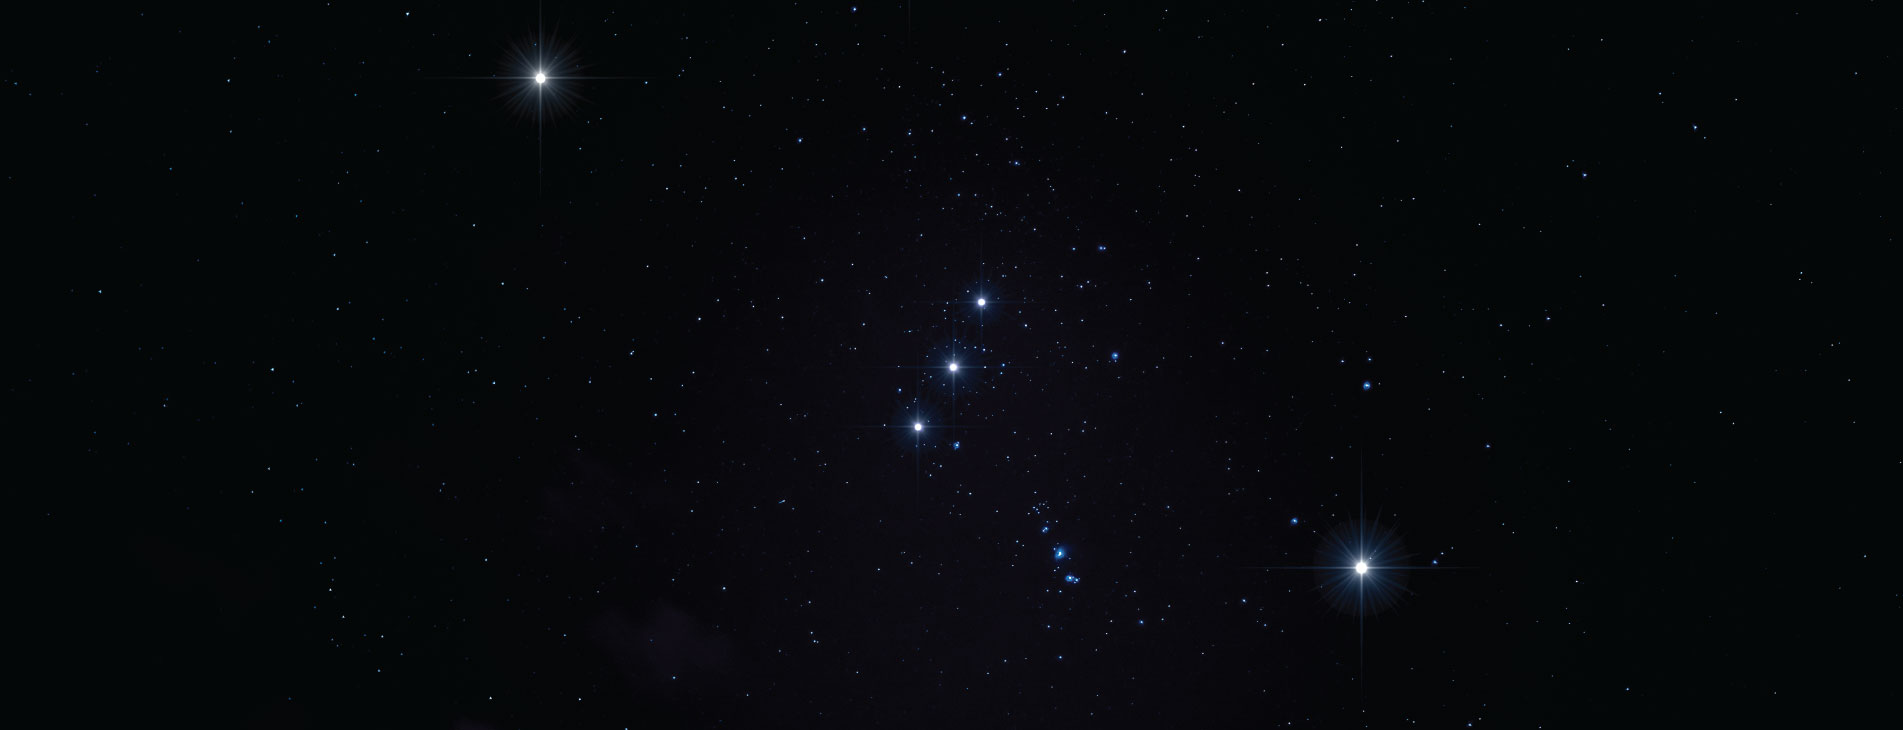 Constellation of Orion in night sky.